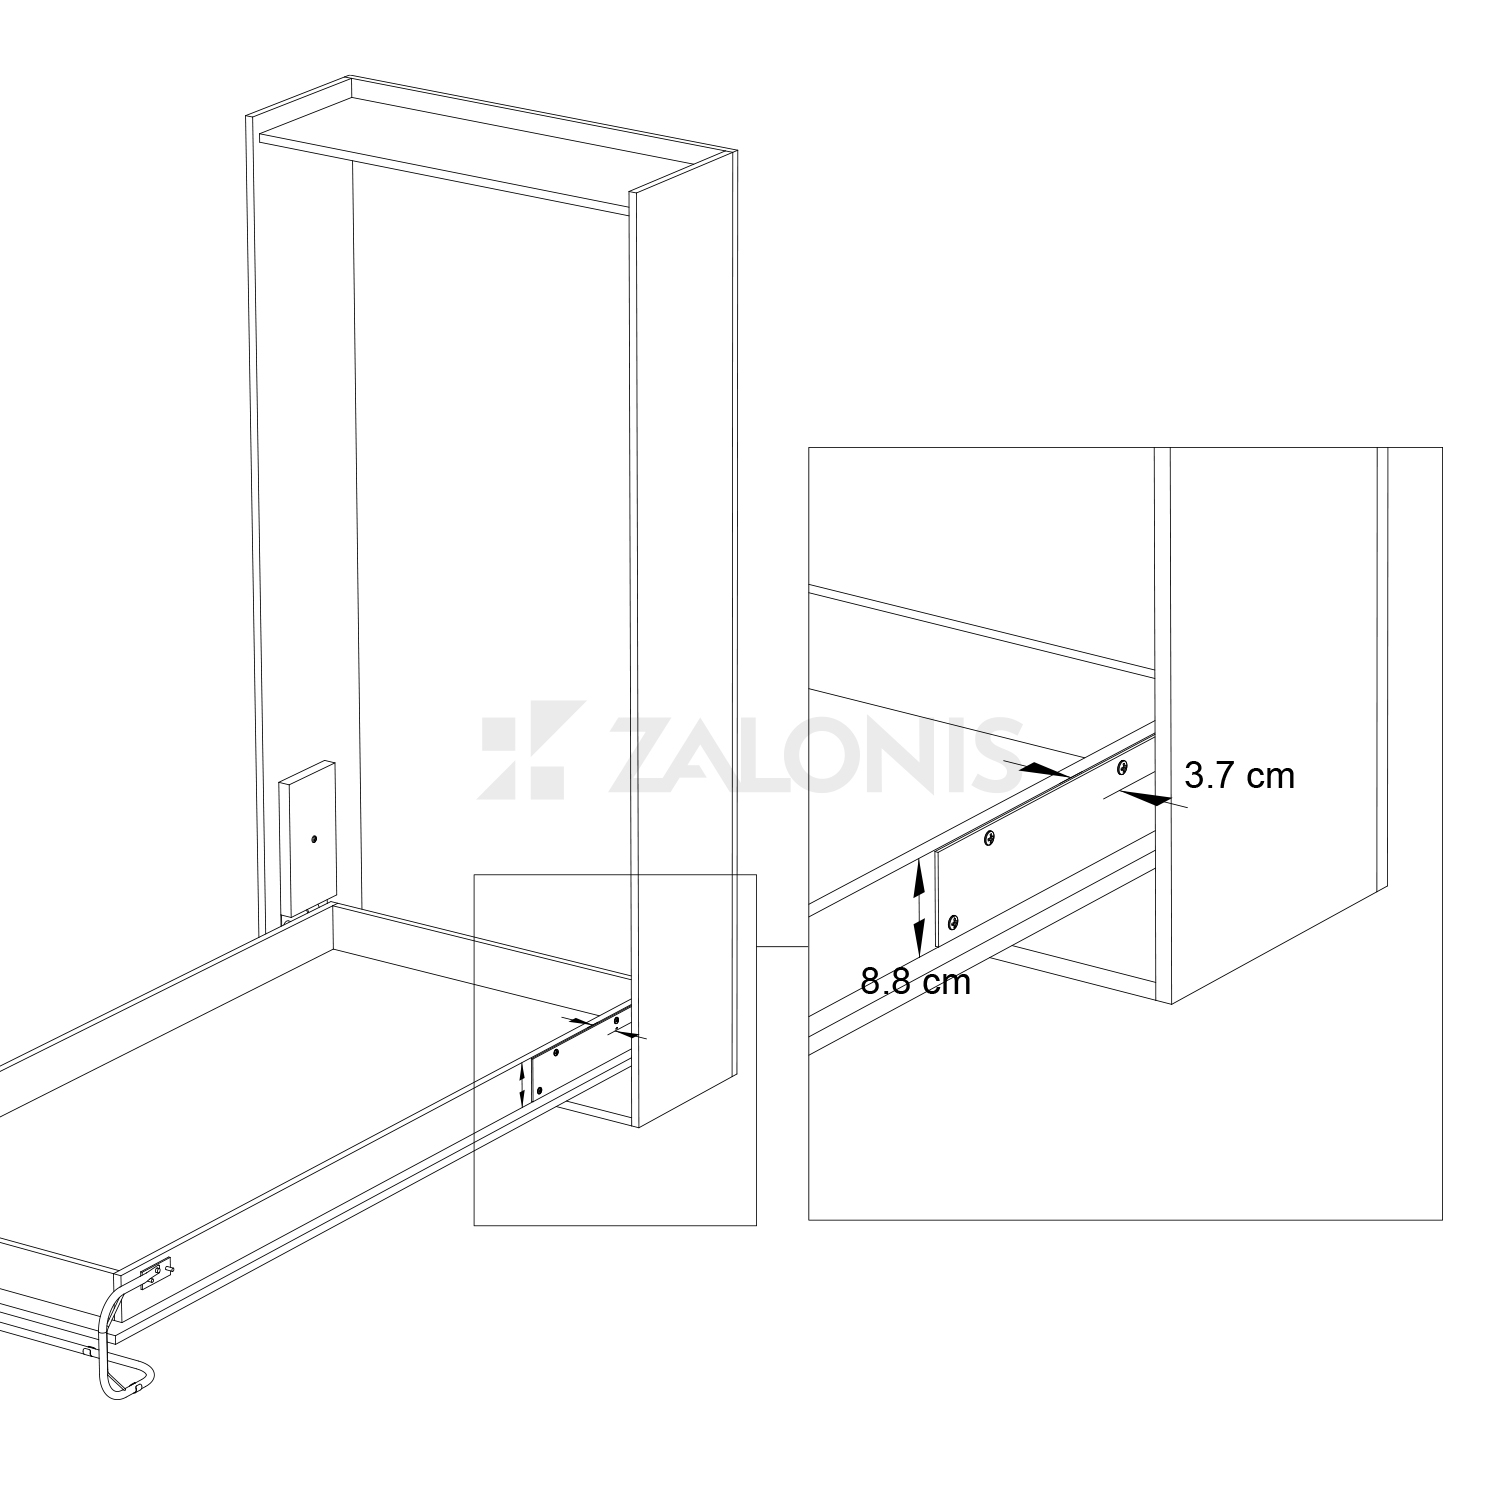 VERTICAL KING SIZE WALL BED - MECHANISM AND LEG